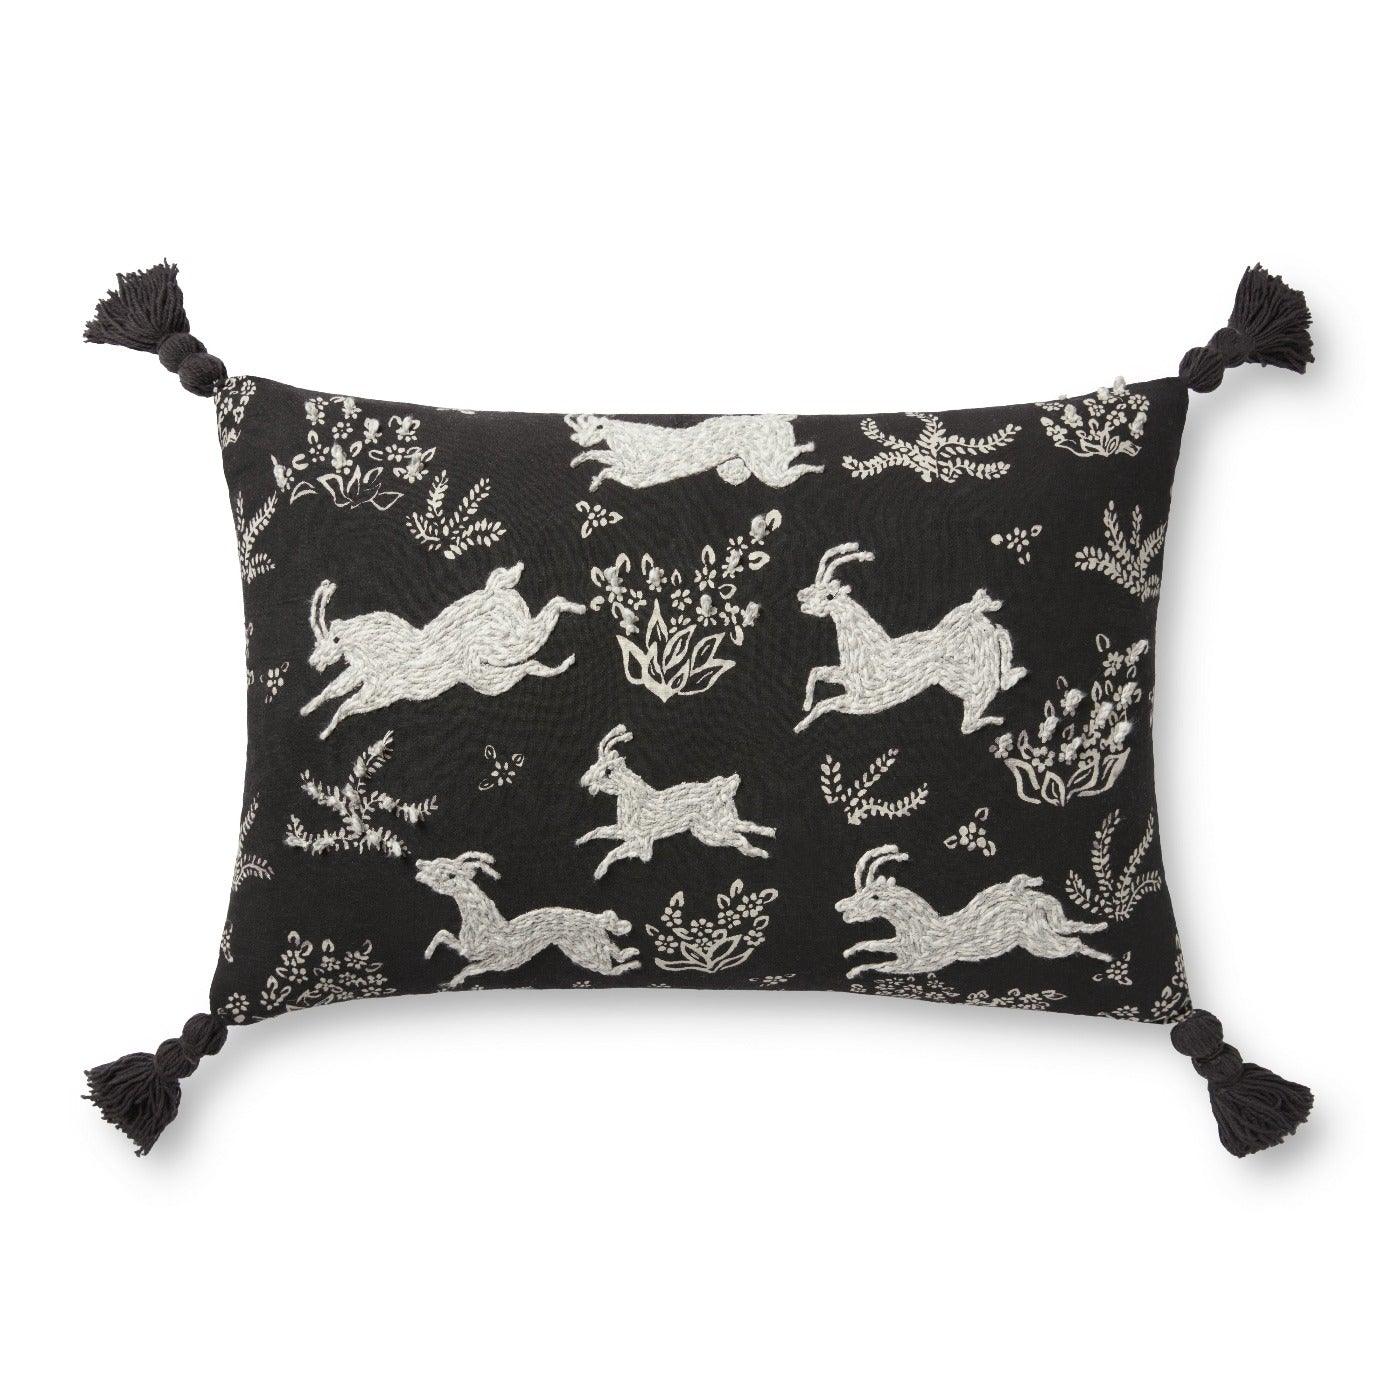 Black Ivory Embroidered Goat Pillow - Reimagine Designs - new, Pillows